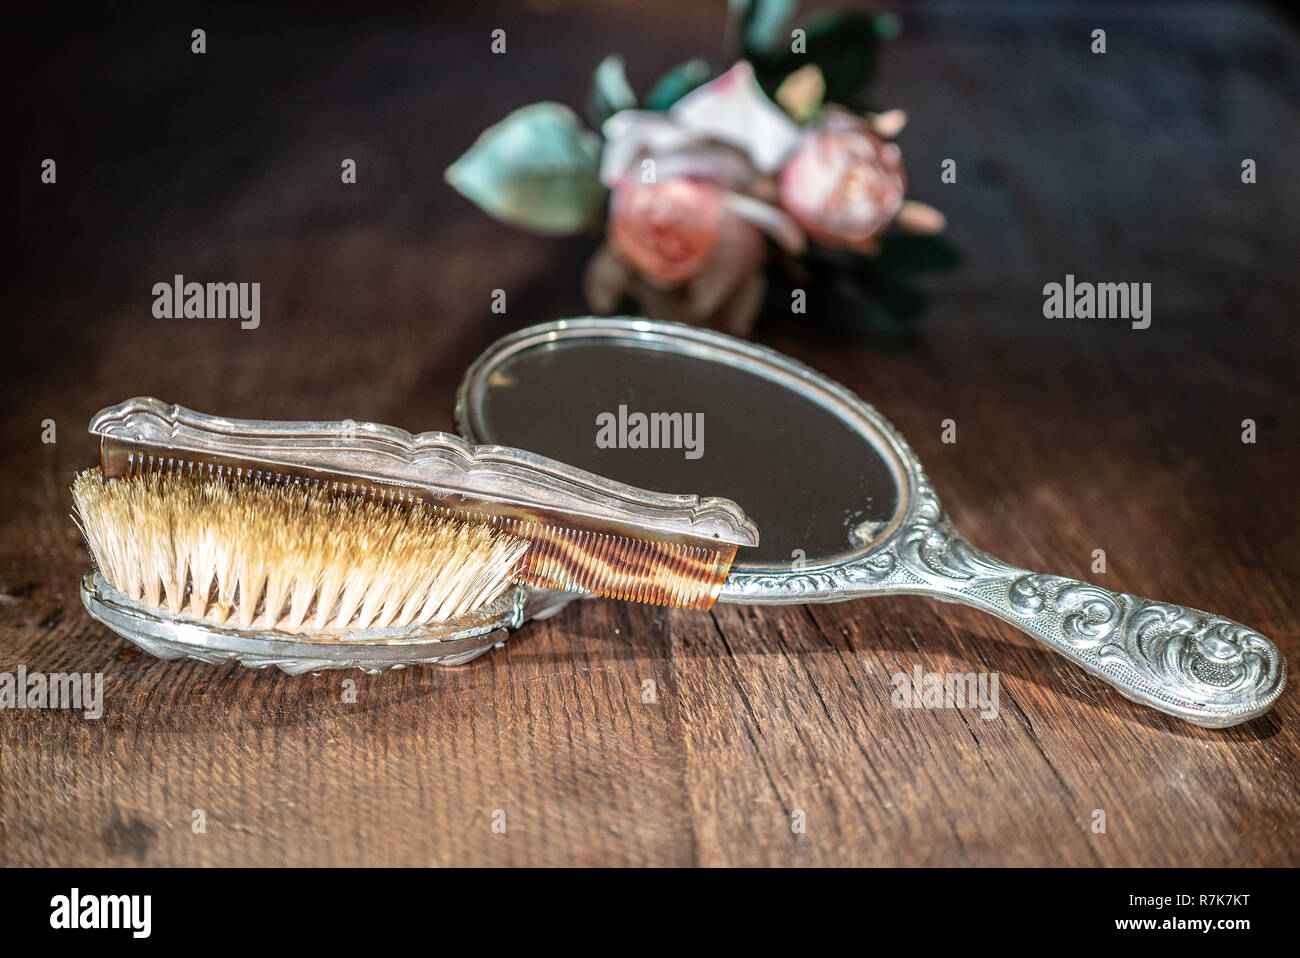 retro silver mirror and comb on old wooden table Stock Photo